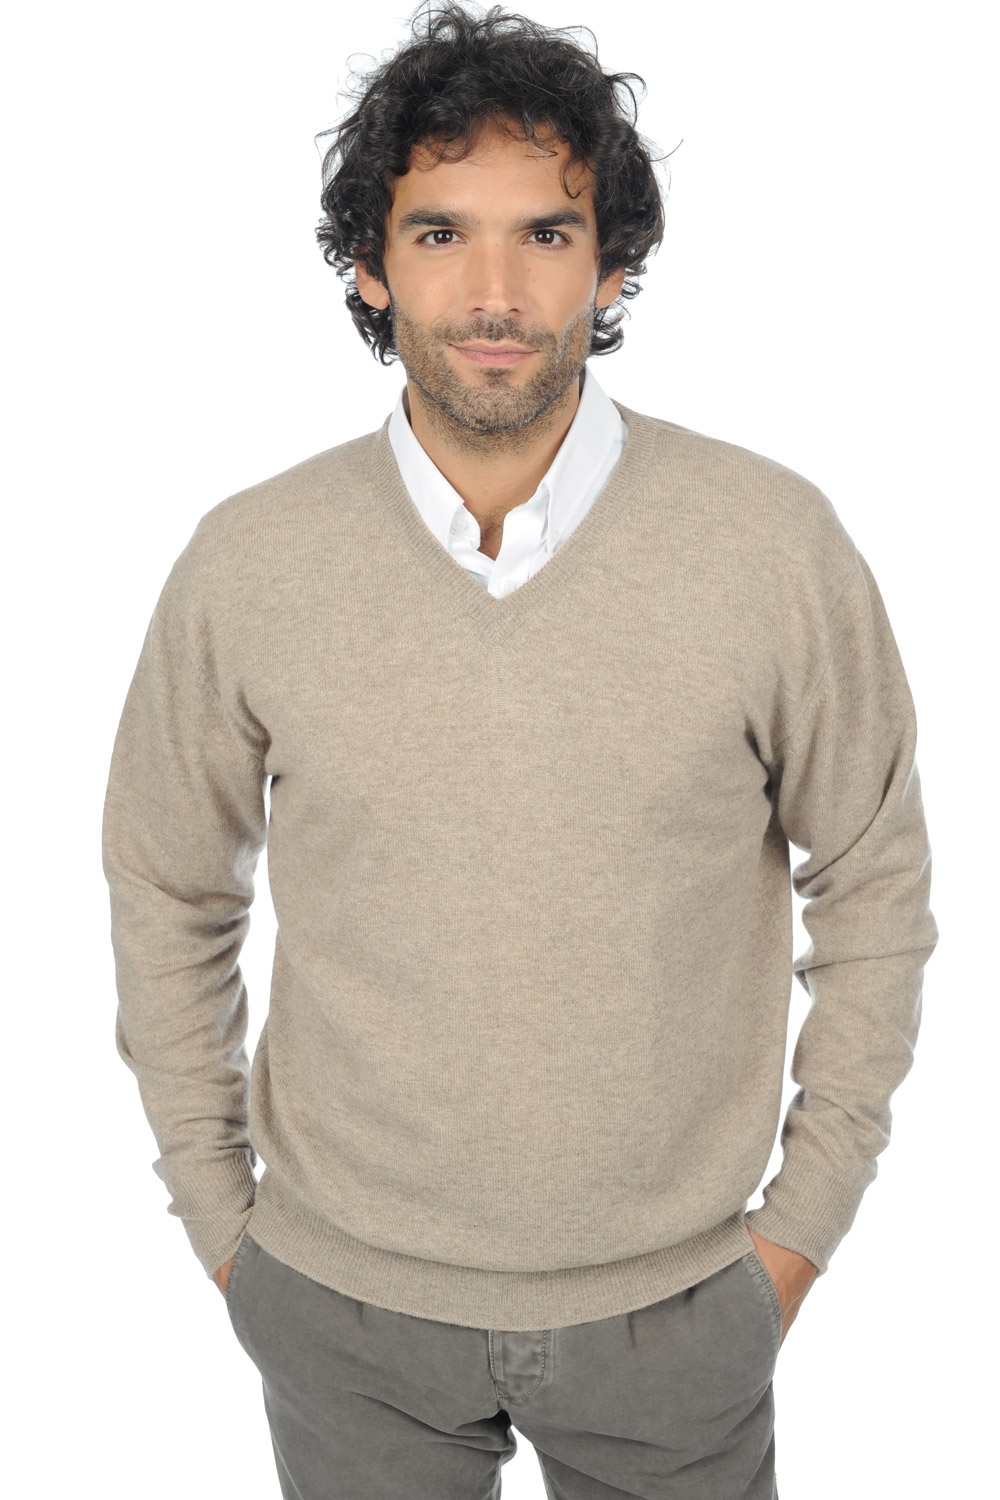 Cachemire pull homme col v hippolyte natural brown 3xl